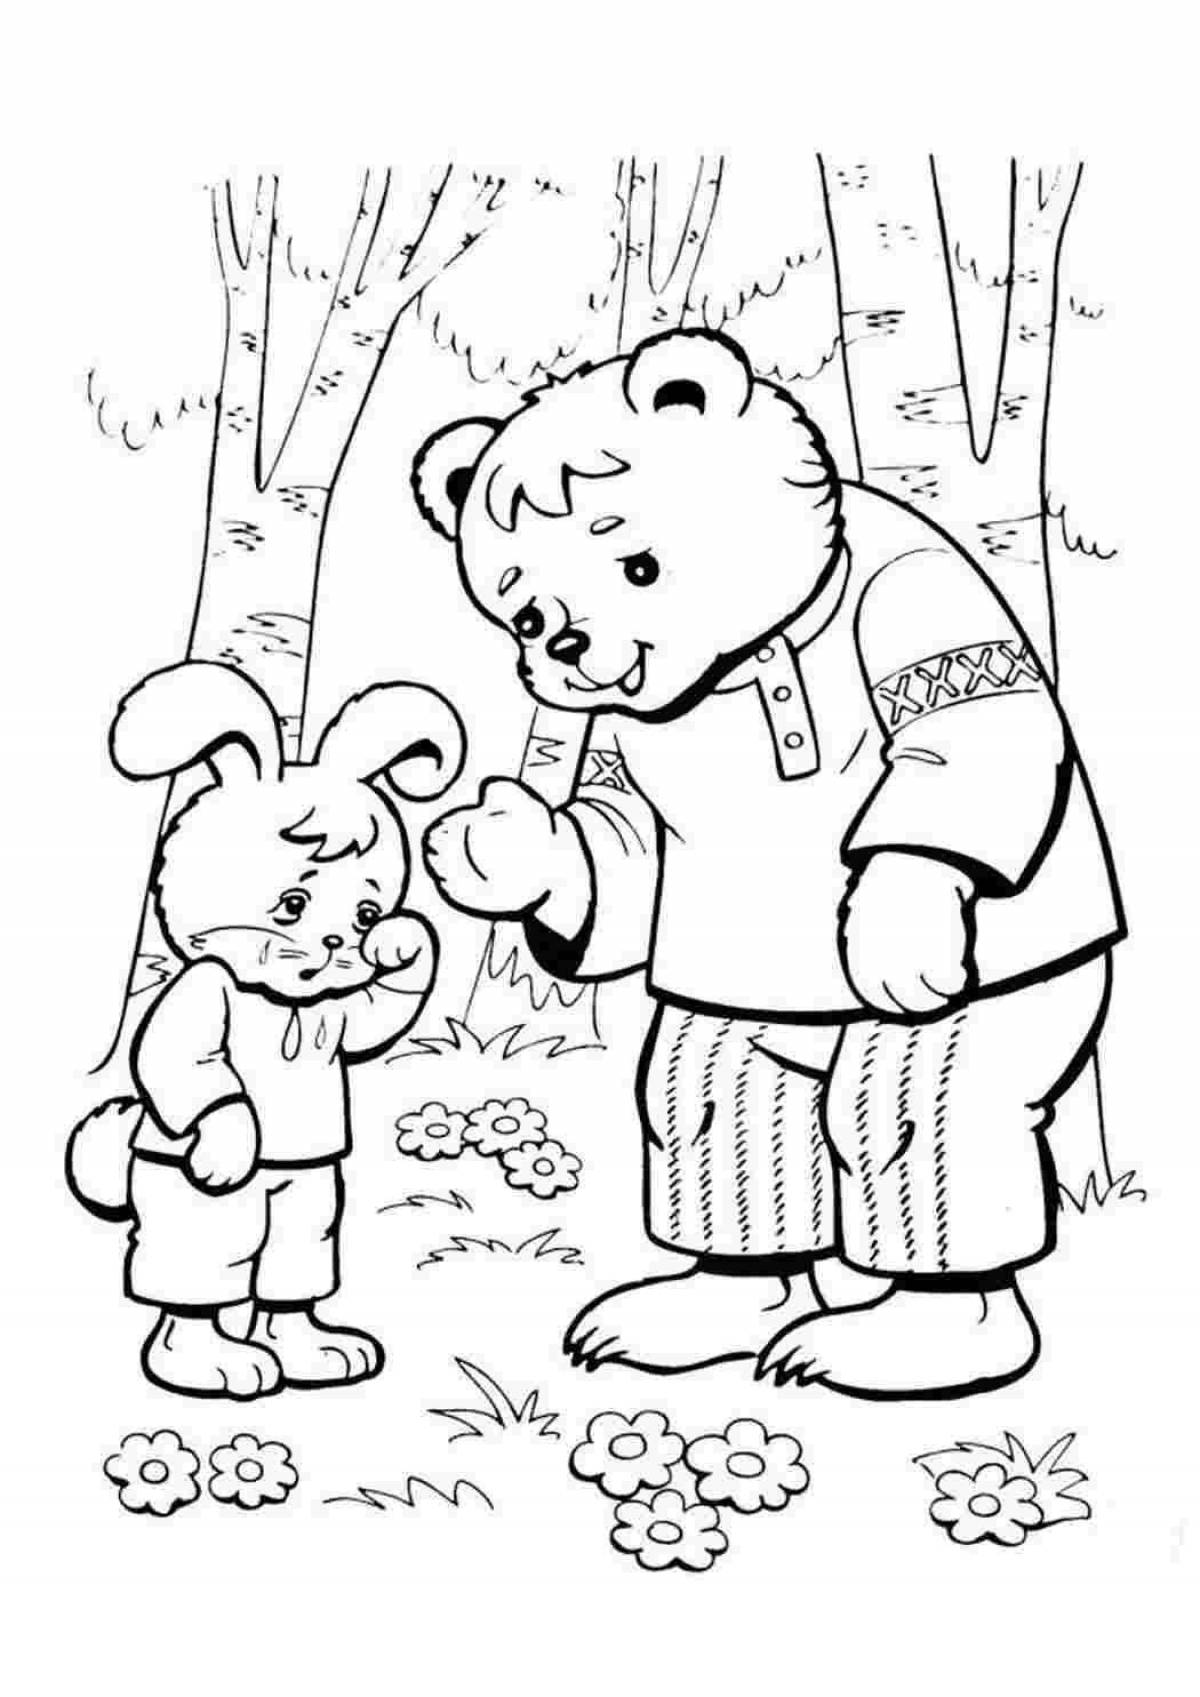 Colorful fairy tale bear coloring book